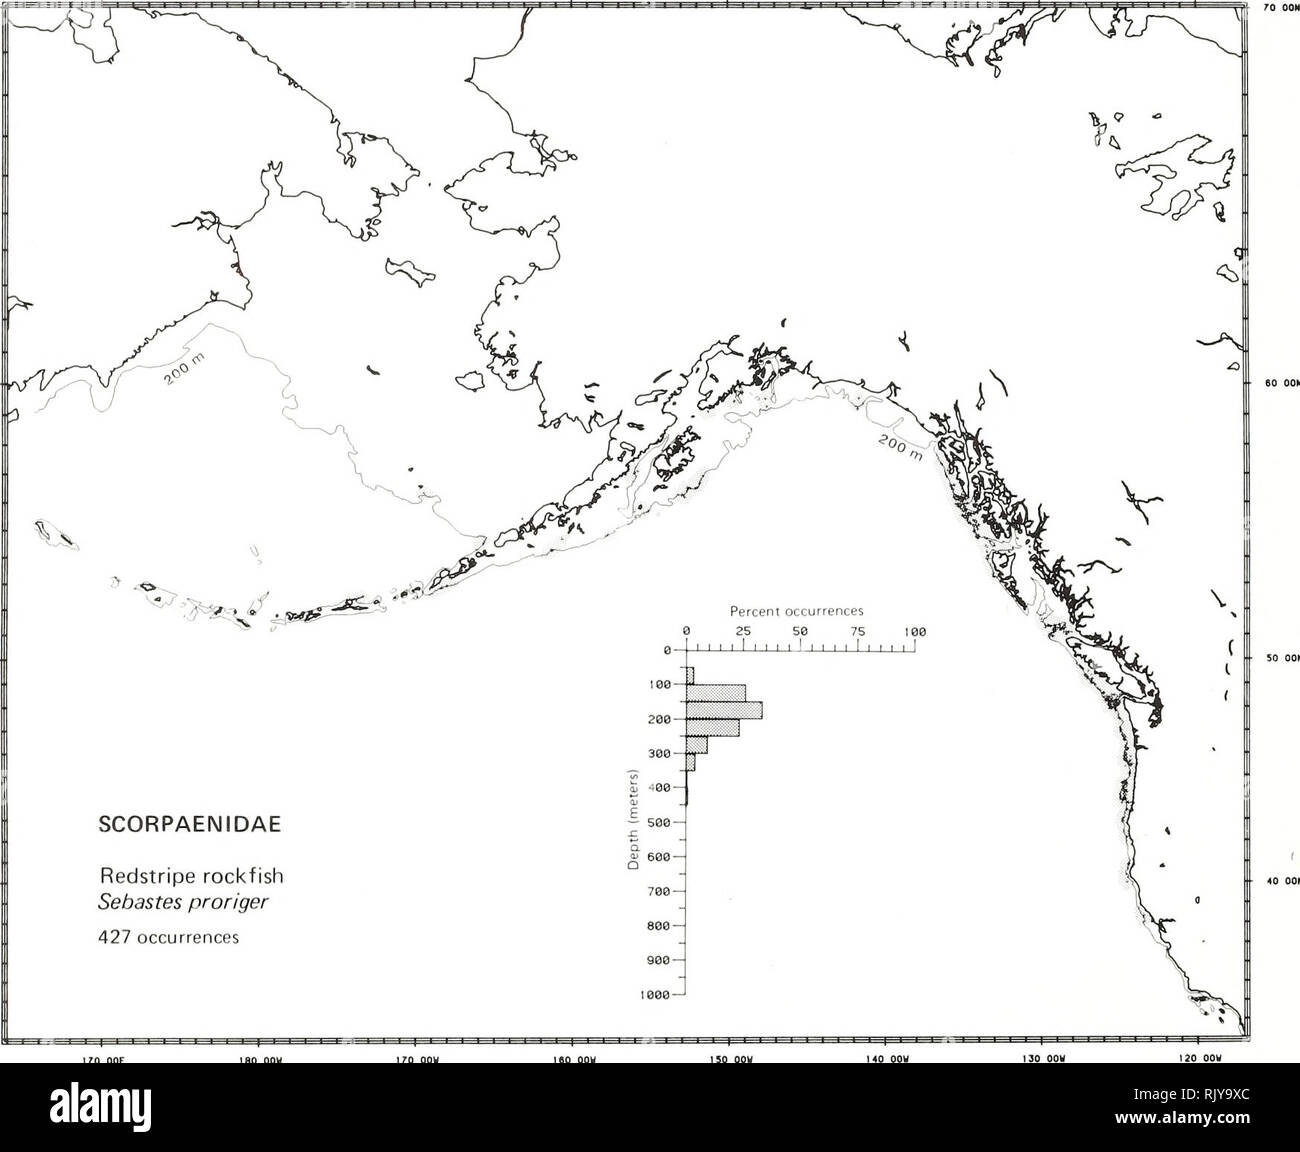 . Atlas and zoogeography of common fishes in the Bering Sea and Northeastern Pacific / M. James Allen, Gary B. Smith. Fishes Bering Sea Geographical distribution.. REDSTRIPE ROCKFISH, Sebastes proriger (Jordan and Gilbert 1880) Scorpaenidae: Scorpionfishes Literature Reported from the Bering Sea and Amchitka Island in the Aleutian Islands to San Diego (Miller and Lea 1972; Simenstad et al. 1977; Eschmeyer and Herald 1983) at depths of 12 to 366 m (Hart 1973; Eschmeyer and Herald 1983). Survey data Taken from Pribilof Canyon in the southeastern Bering Sea and Atka Island in the Aleutian Islands Stock Photo